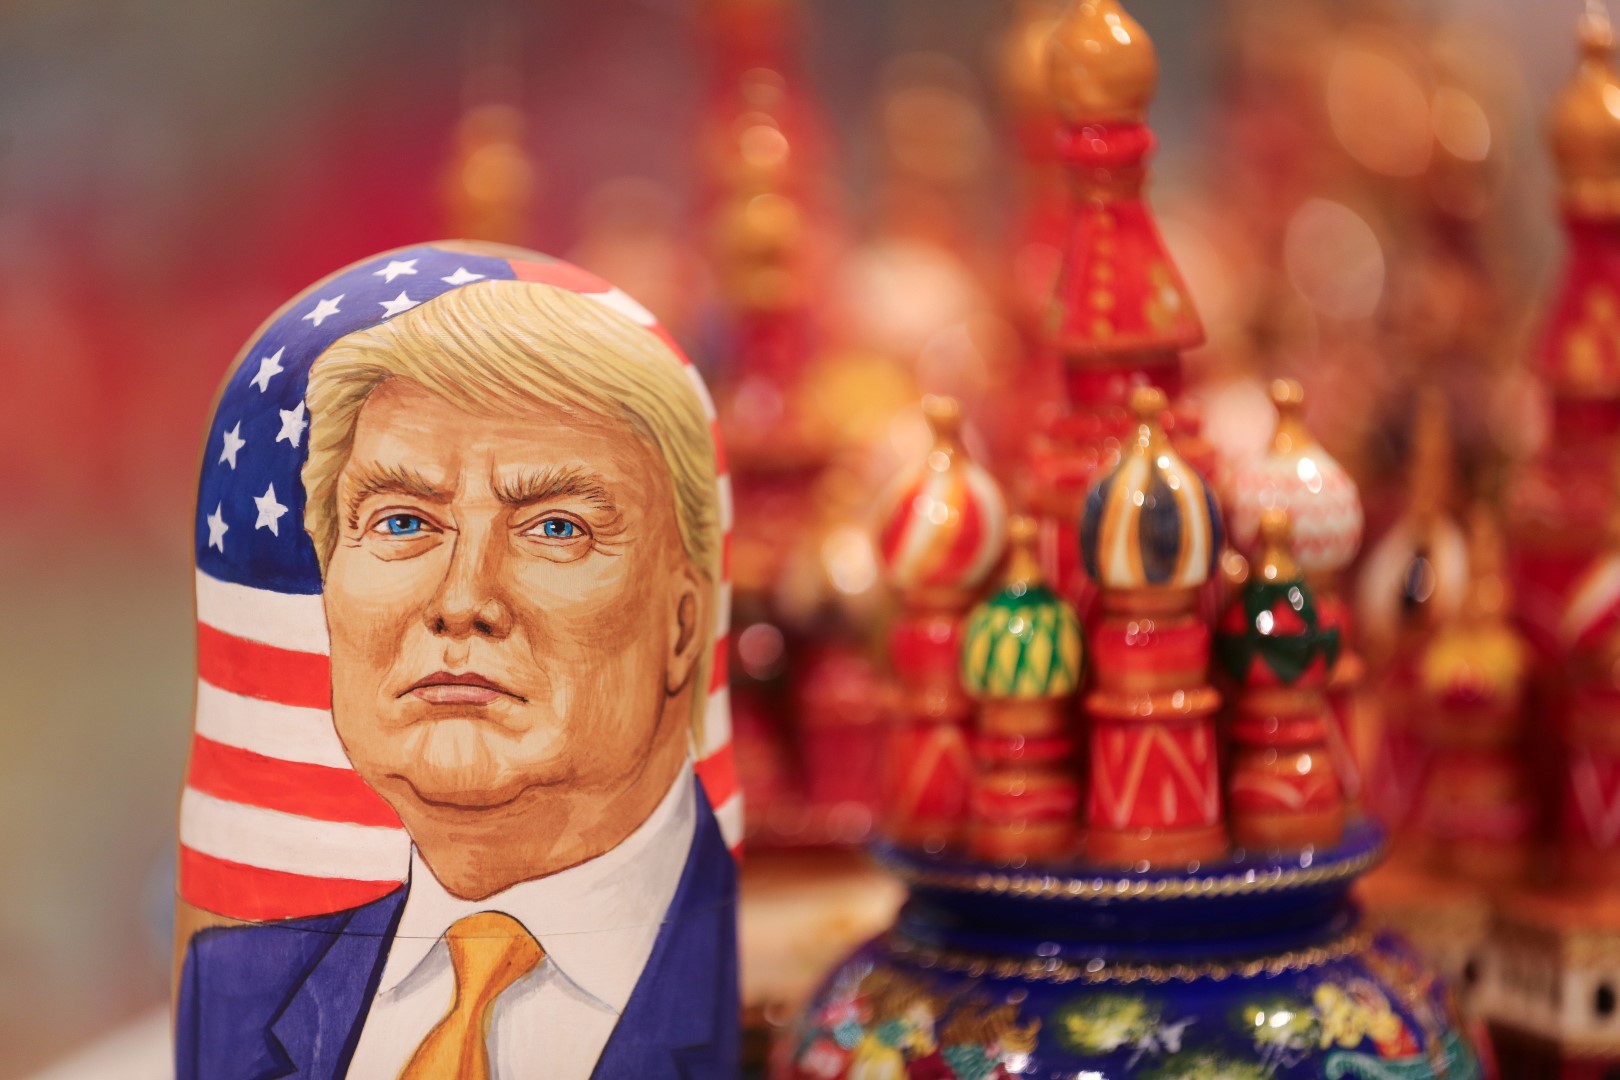 A martyoshka doll showing Donald Trump, U.S. president elect, sits beside painted wooden models of St. Basil's cathedral in a souvenir store in Moscow, Russia, Nov. 9, 2016. The ruble dropped as Donald Trump won the U.S. presidential race, driving down crude prices on concern his protectionist policies will sap global growth. Photographer: Andrey Rudakov/Bloomberg.